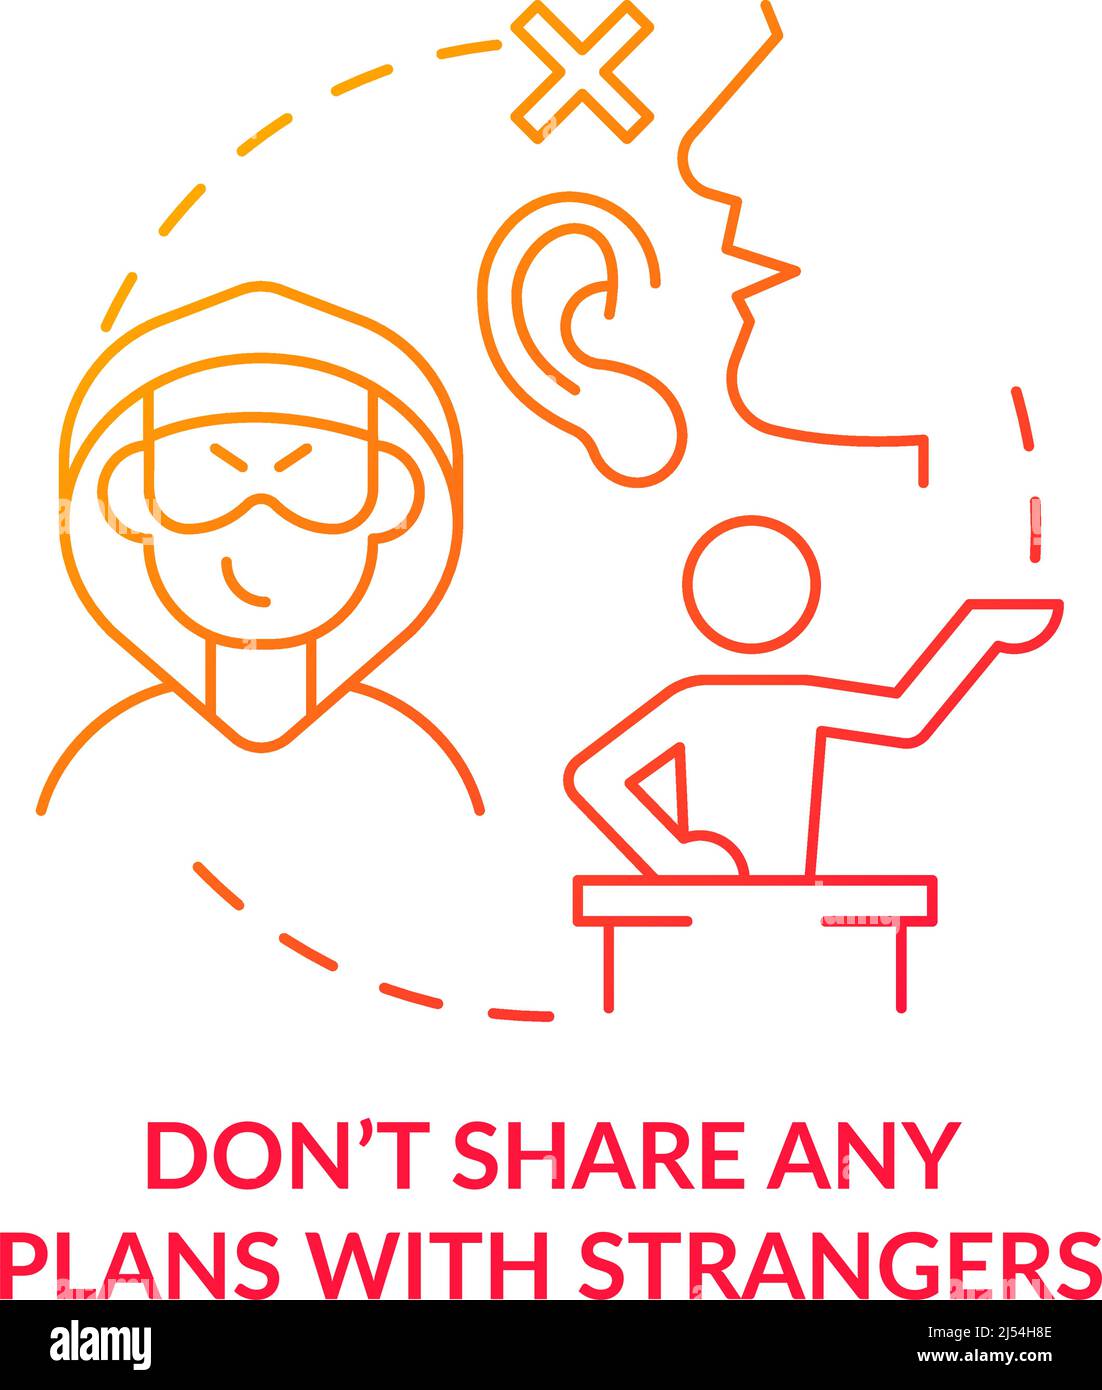 Dont share any plans with strangers red gradient concept icon Stock Vector